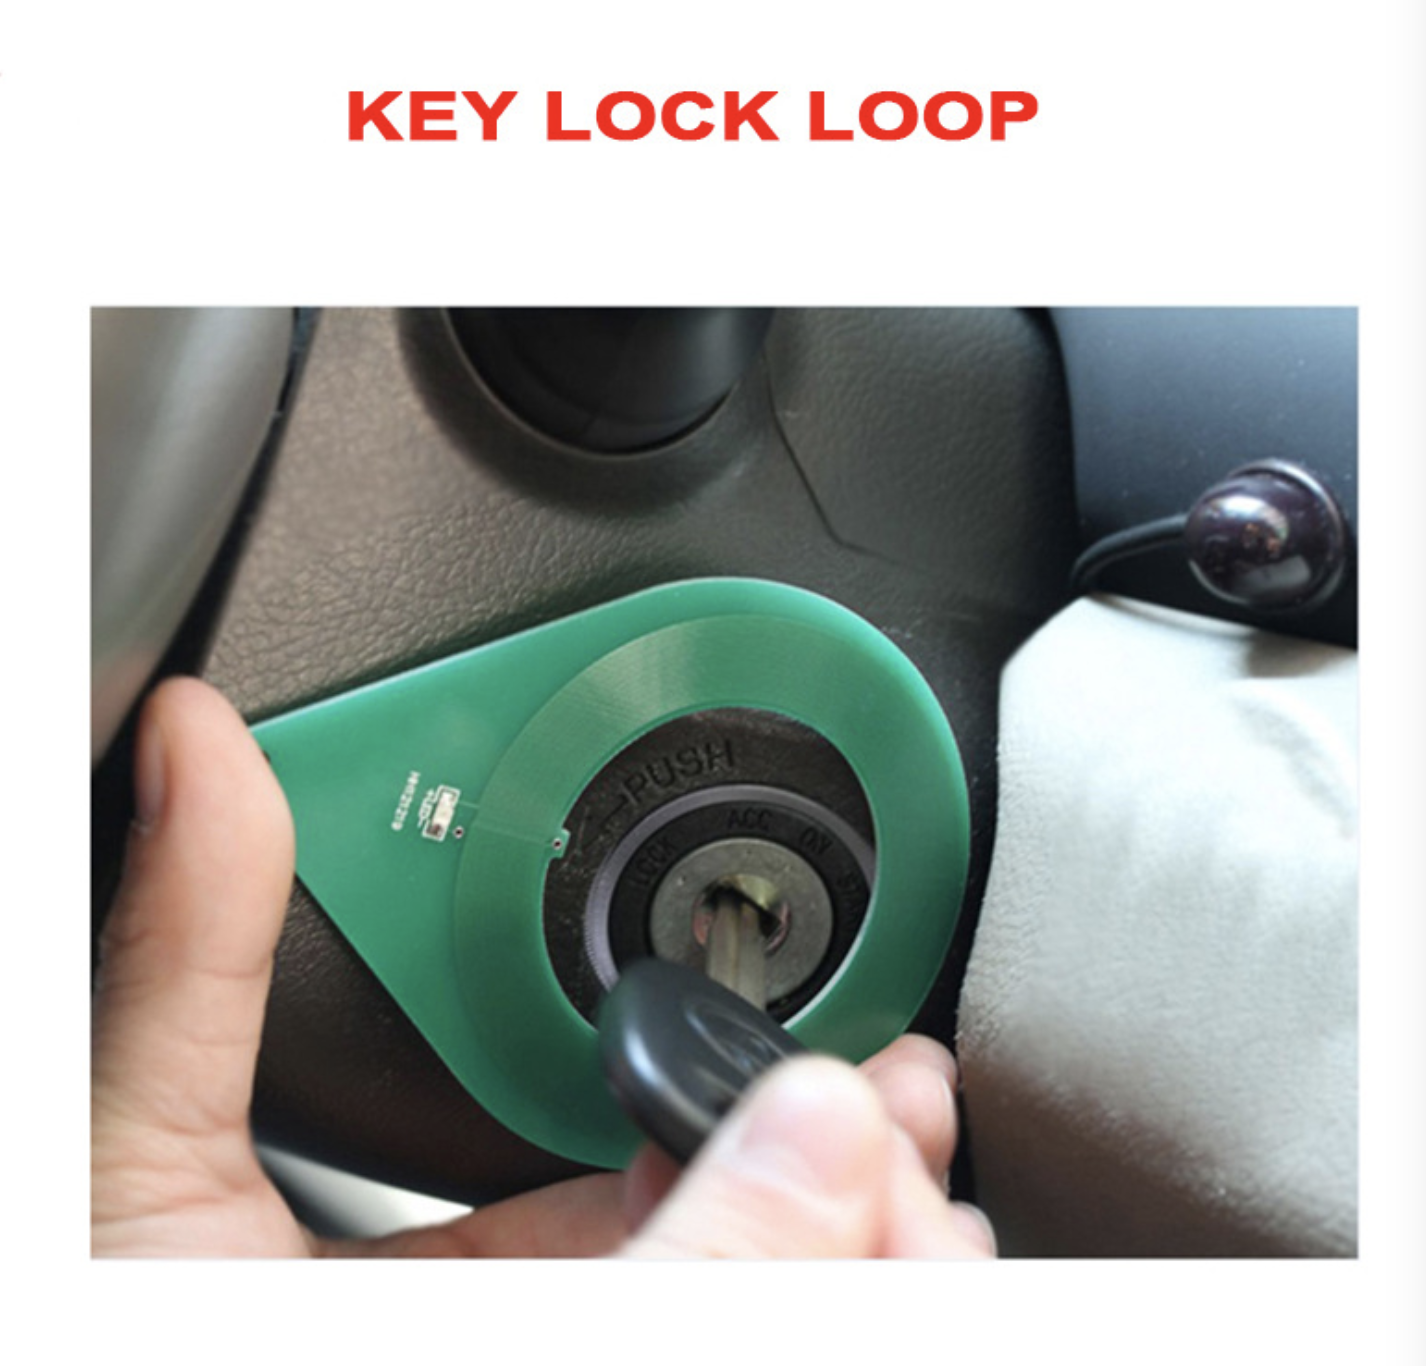 

Auto Lock Inspection Loop for Key Check Car Lock Tools Kits Car Lock Inspection Loop for Locksmith